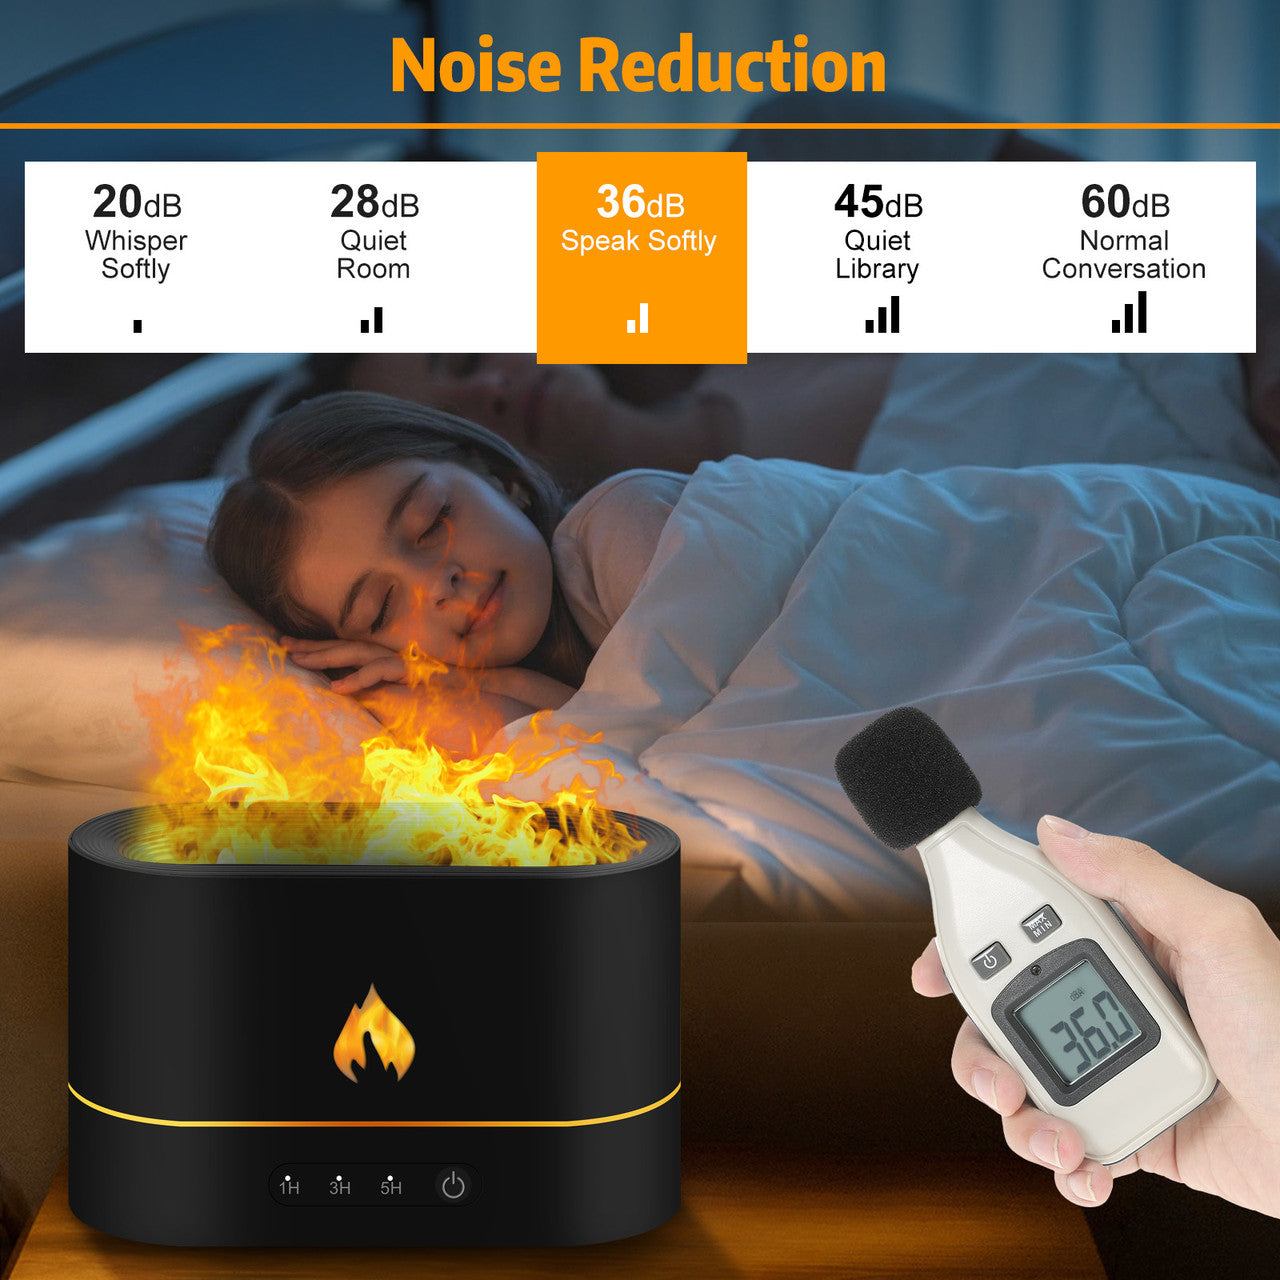 Flame Aroma Diffuser with 2 Different Flame Effects and an Auto-Off Design Feature